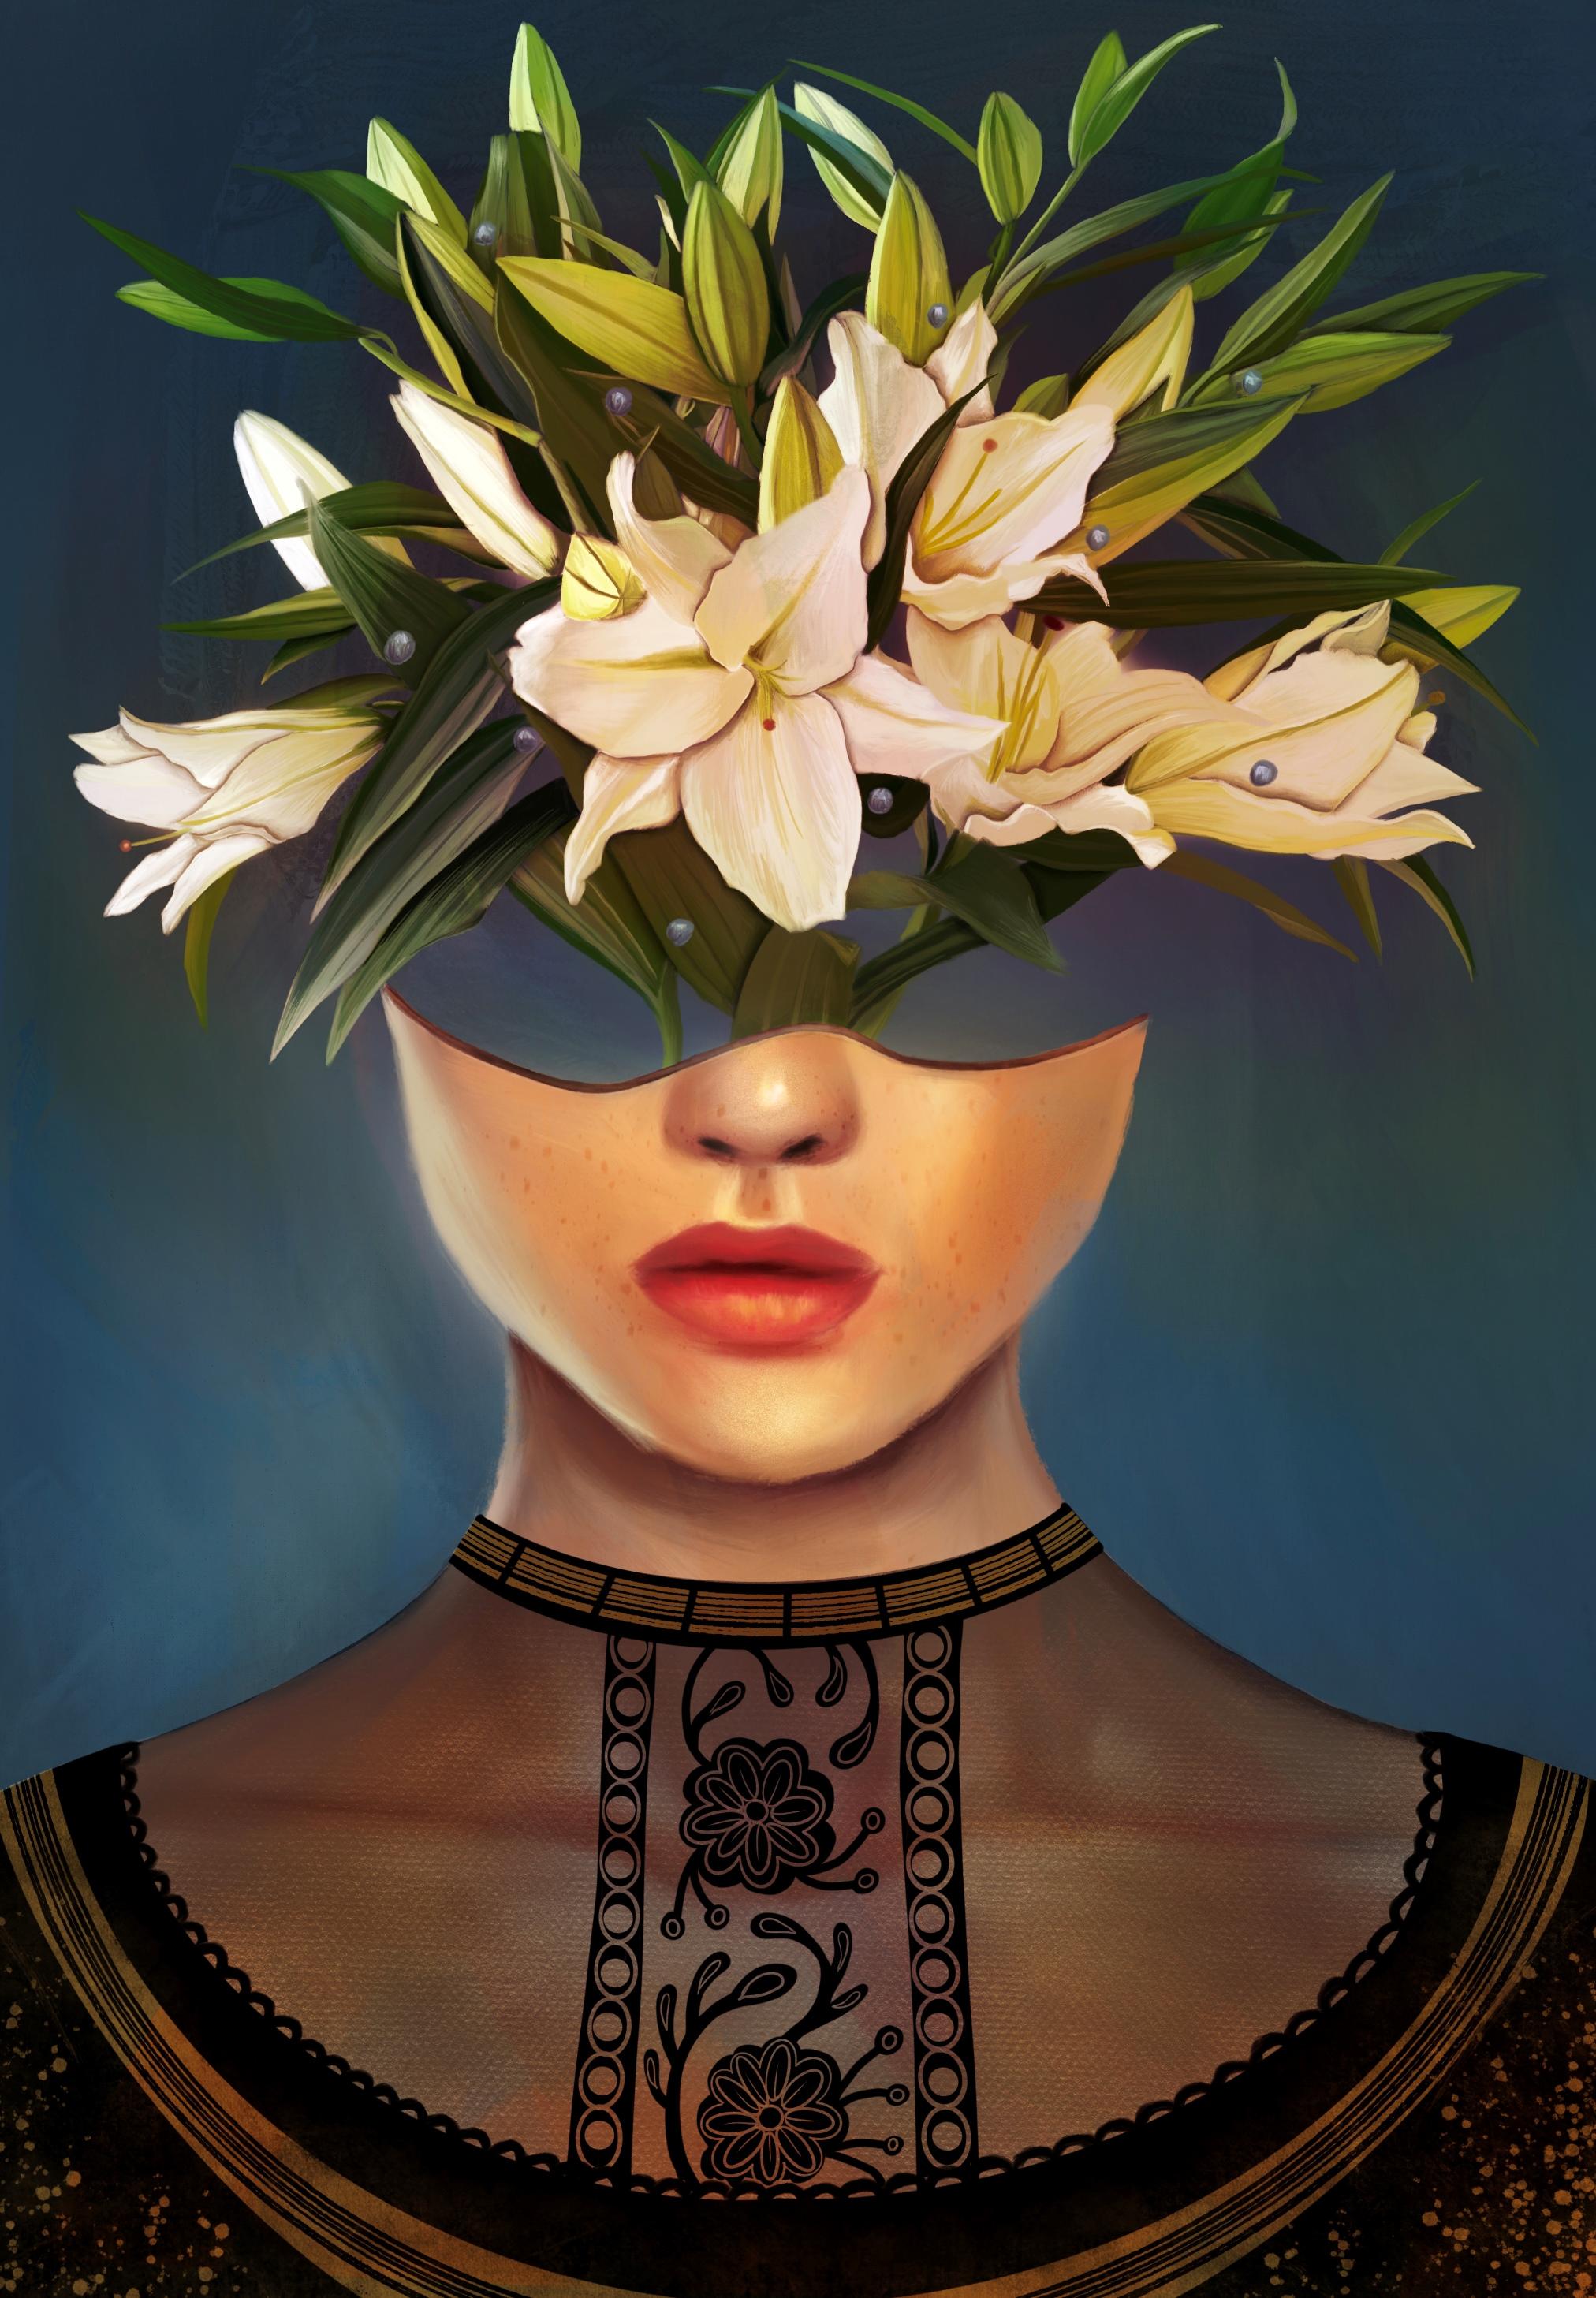 A digital painting by Lily Bourne printed on eco fine art paper titled Lilium showing a female head dressed in a black lace top. The head acts as a vase for white lily flowers.